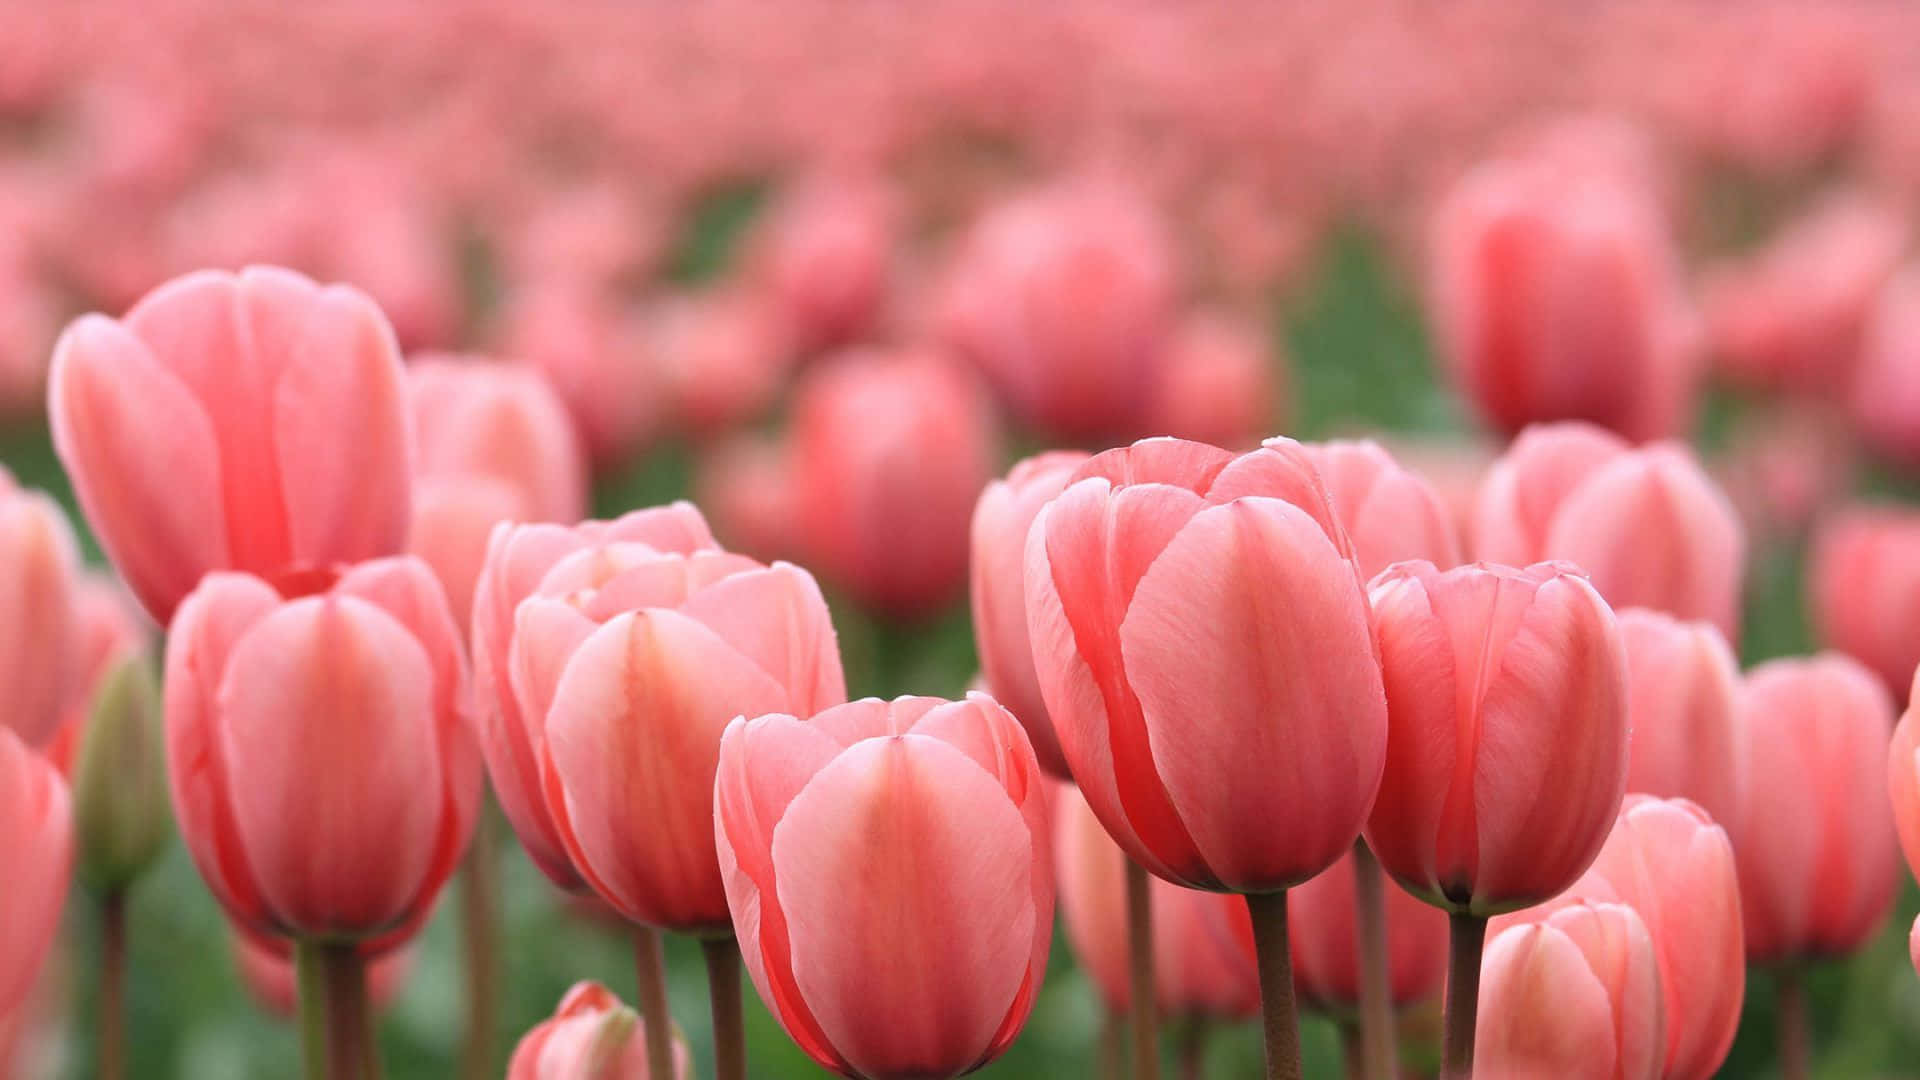 A field of vibrant tulips ready to bloom